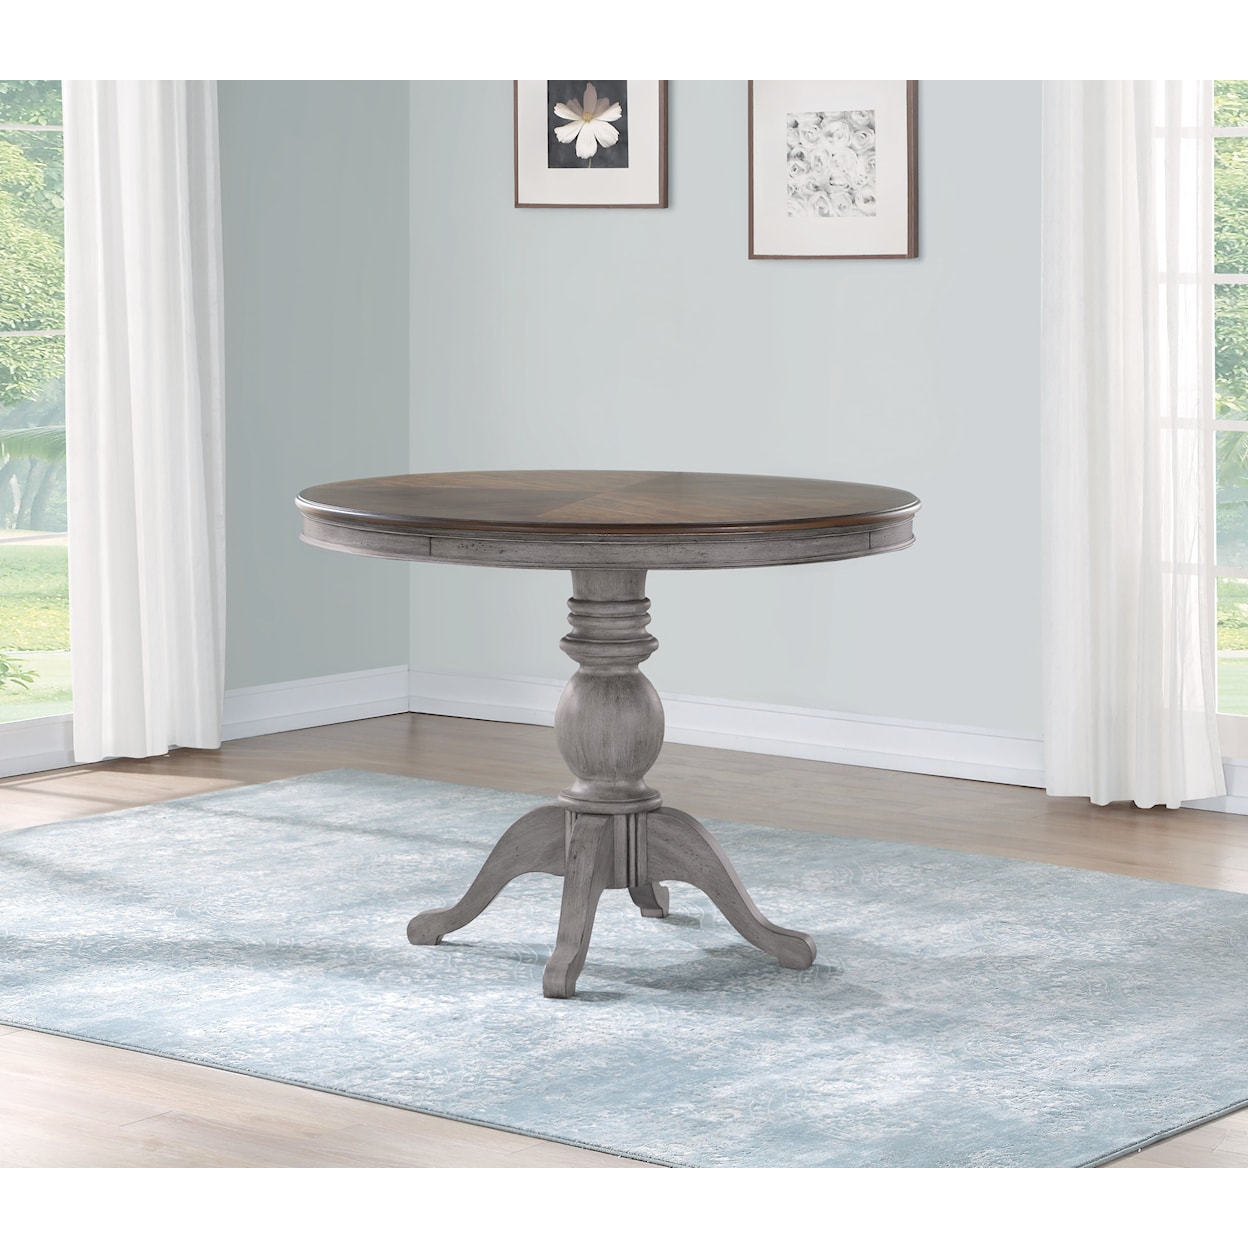 Flexsteel Wynwood Collection Plymouth Counter Height Pedestal Table